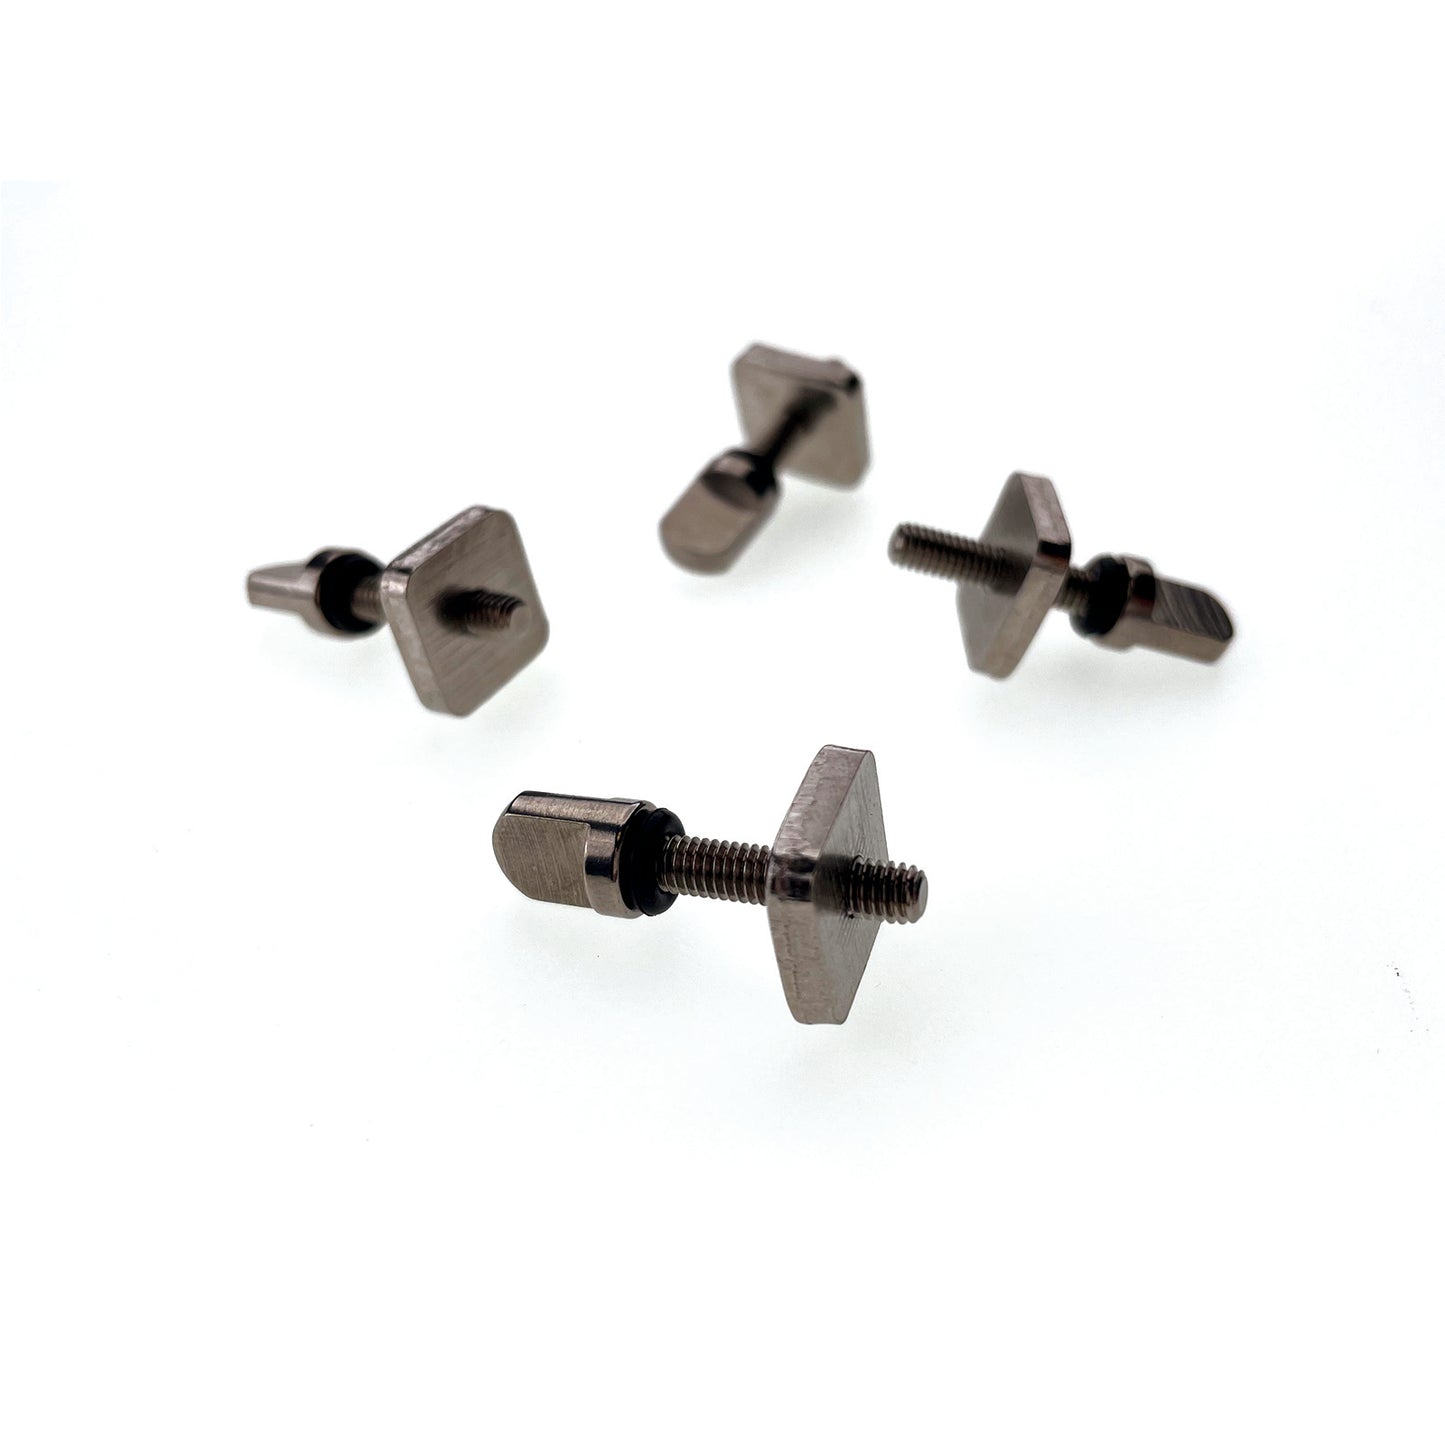 4pcs set fin screw replacement - Arkersport